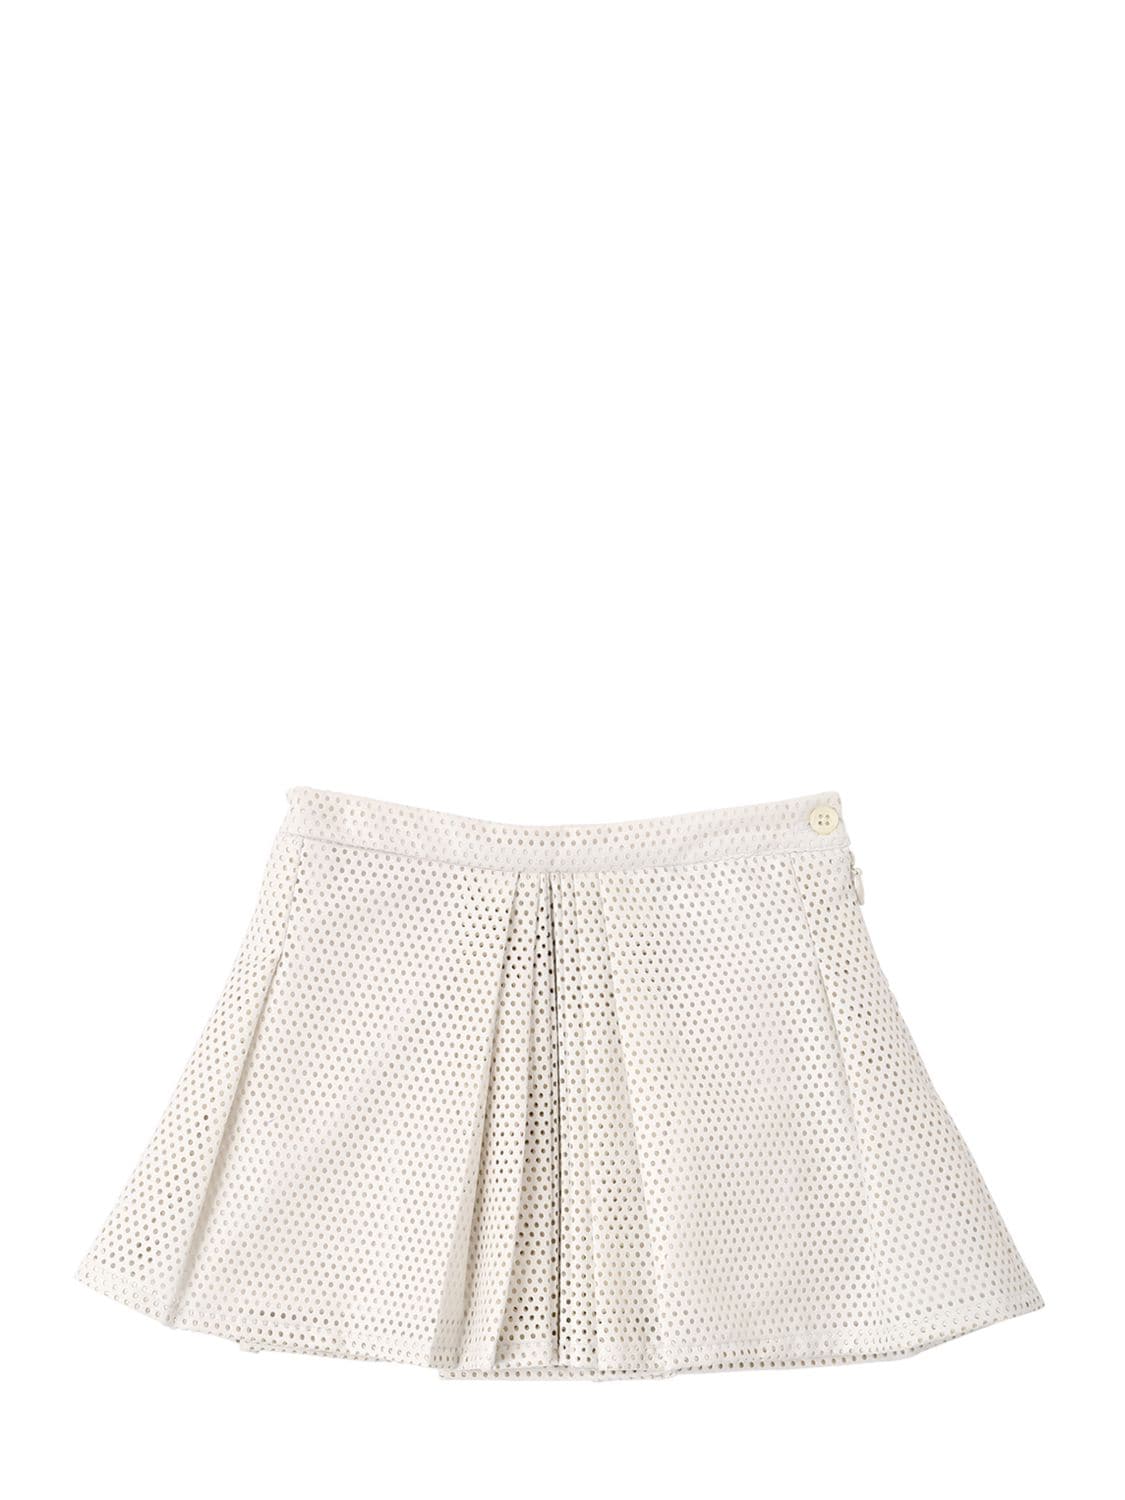 Anne Kurris Kids' Perforated Faux Leather Mini Skirt In White